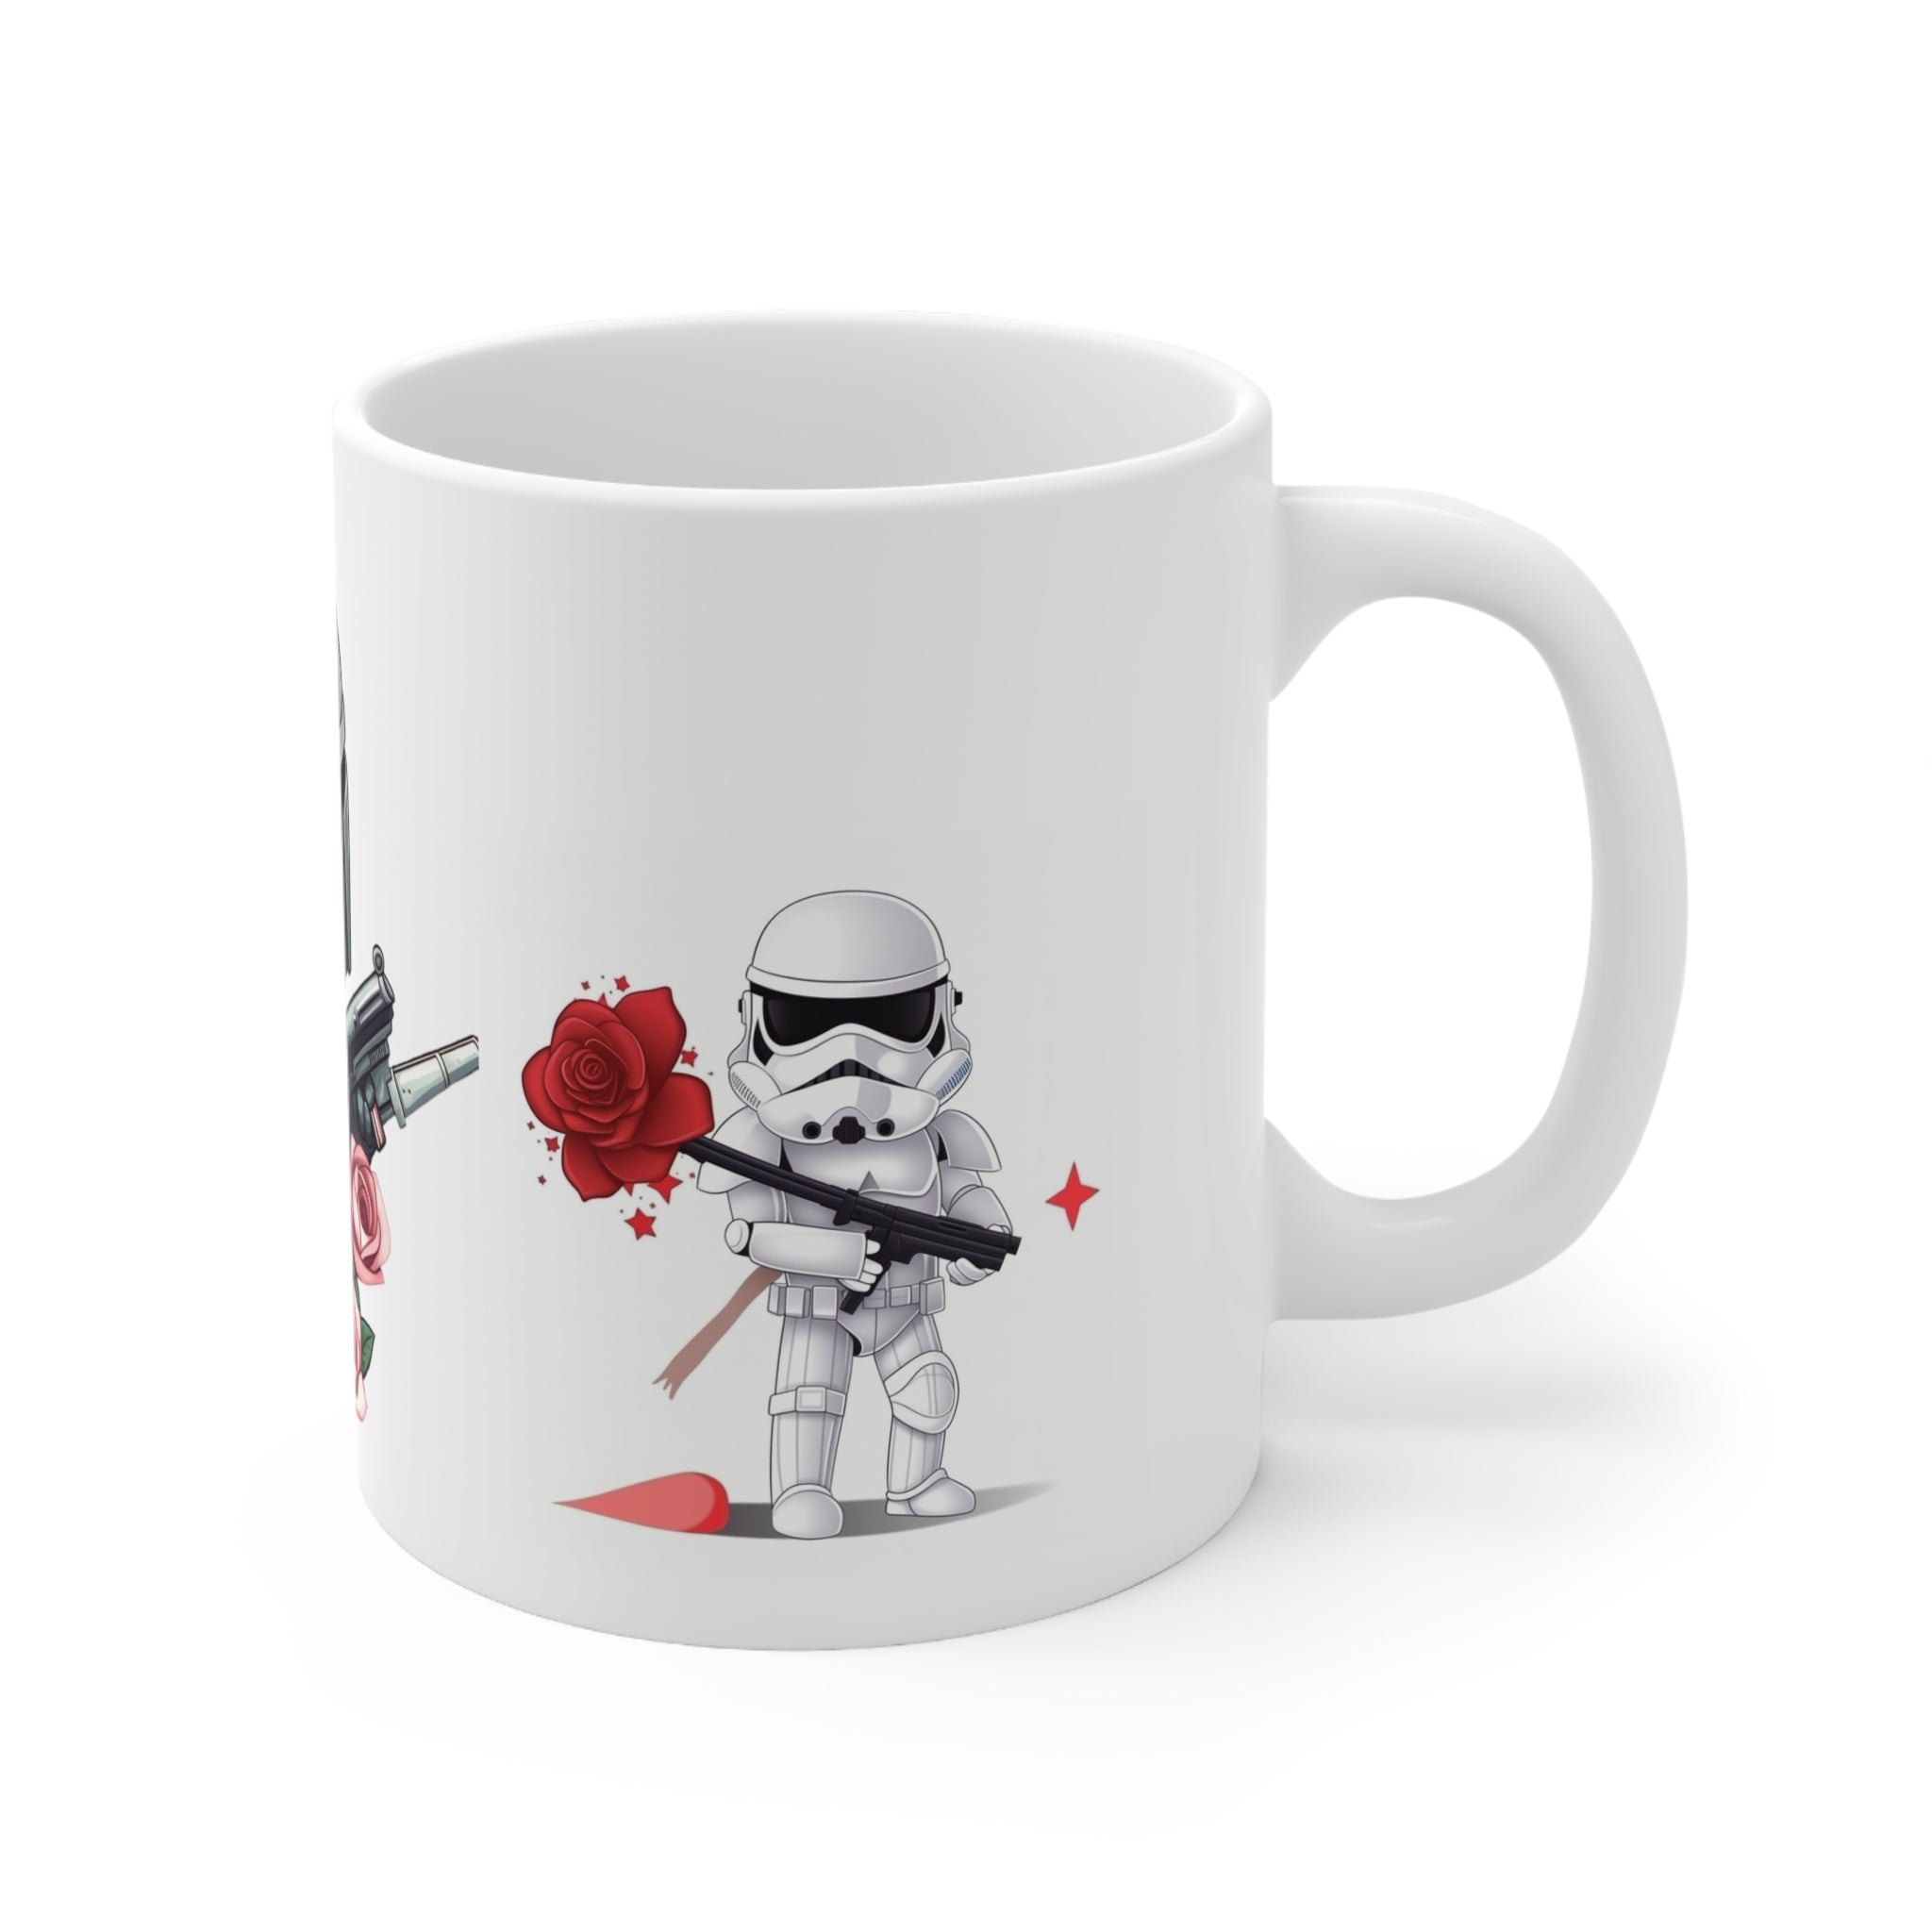 Complete Your Original Trilogy Collection with the Retro Sci Fi Series Iconic Bounty Hunter Adorable Cupid Ceramic Mug 11oz - Unique Gift for the One You Love or for the Ideal Gift for Friends and Family